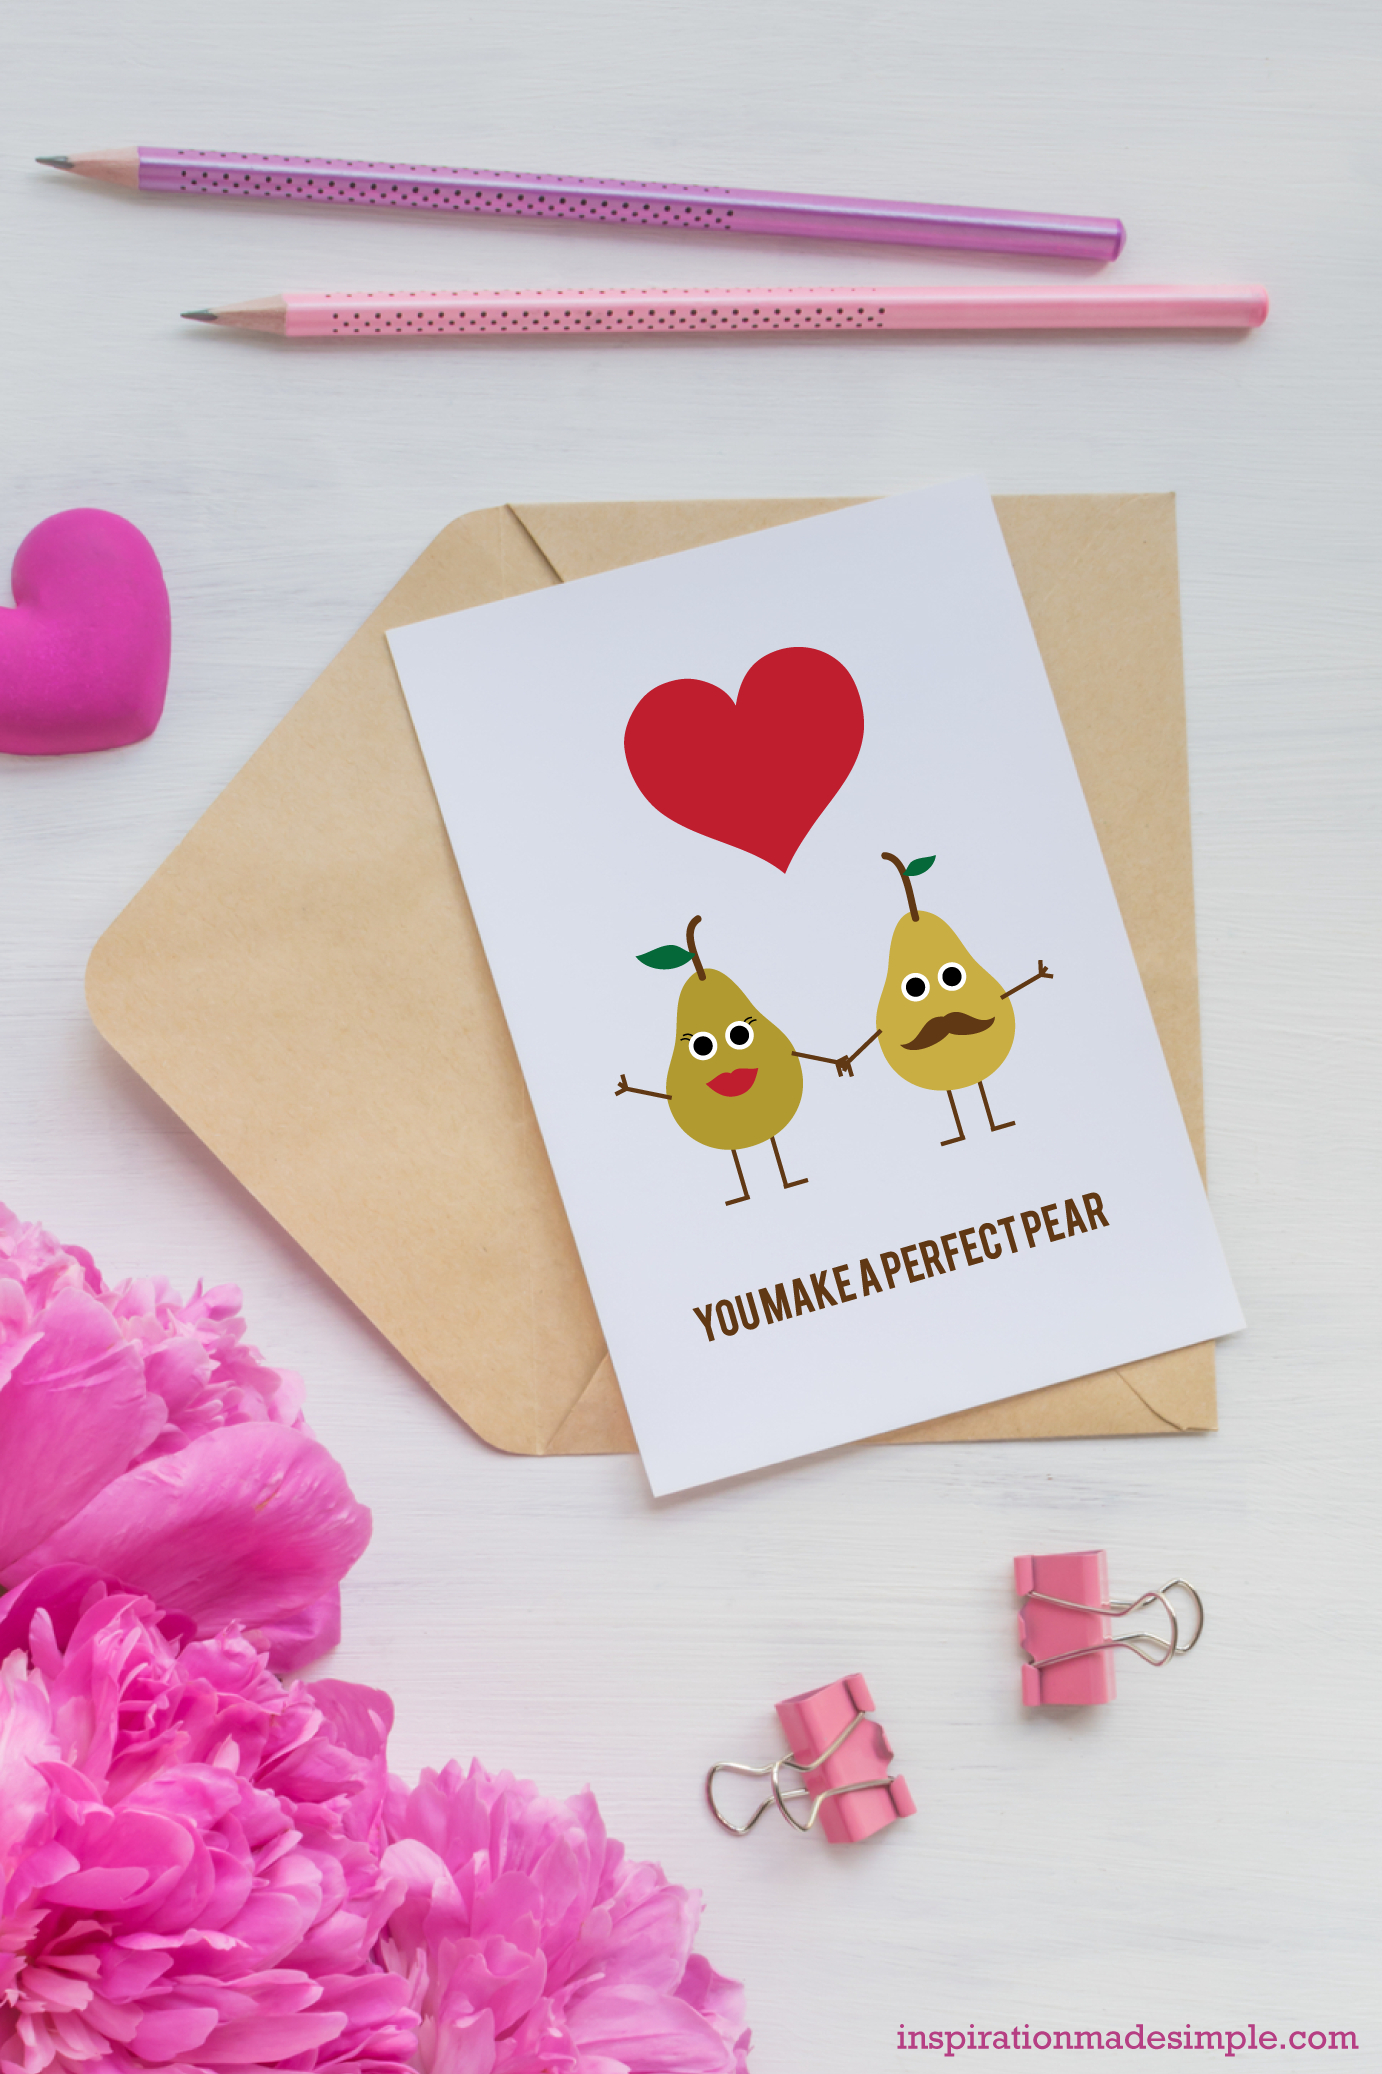 Anniversary Cards And Wedding Cards - Free Printables - Free Printable Anniversary Cards No Download